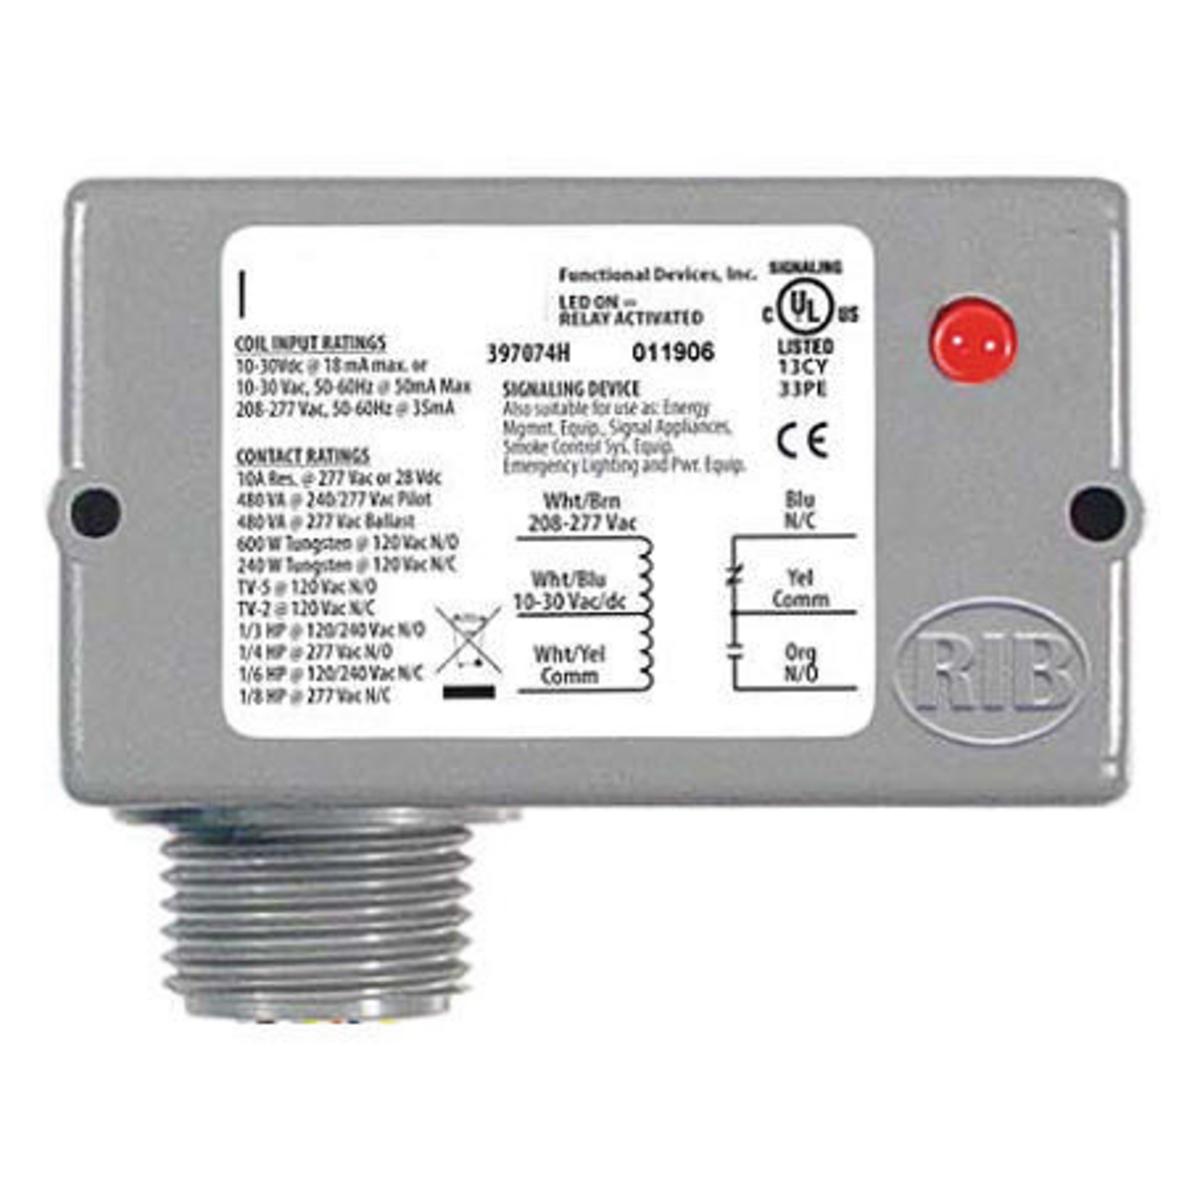 Hubbell AAR10C120 Switches and Lighting Controls, H-MOSS, Add-A-Relay, 10A, Pilot Duty,120V AC  ; Use with 120V AC Only ; 